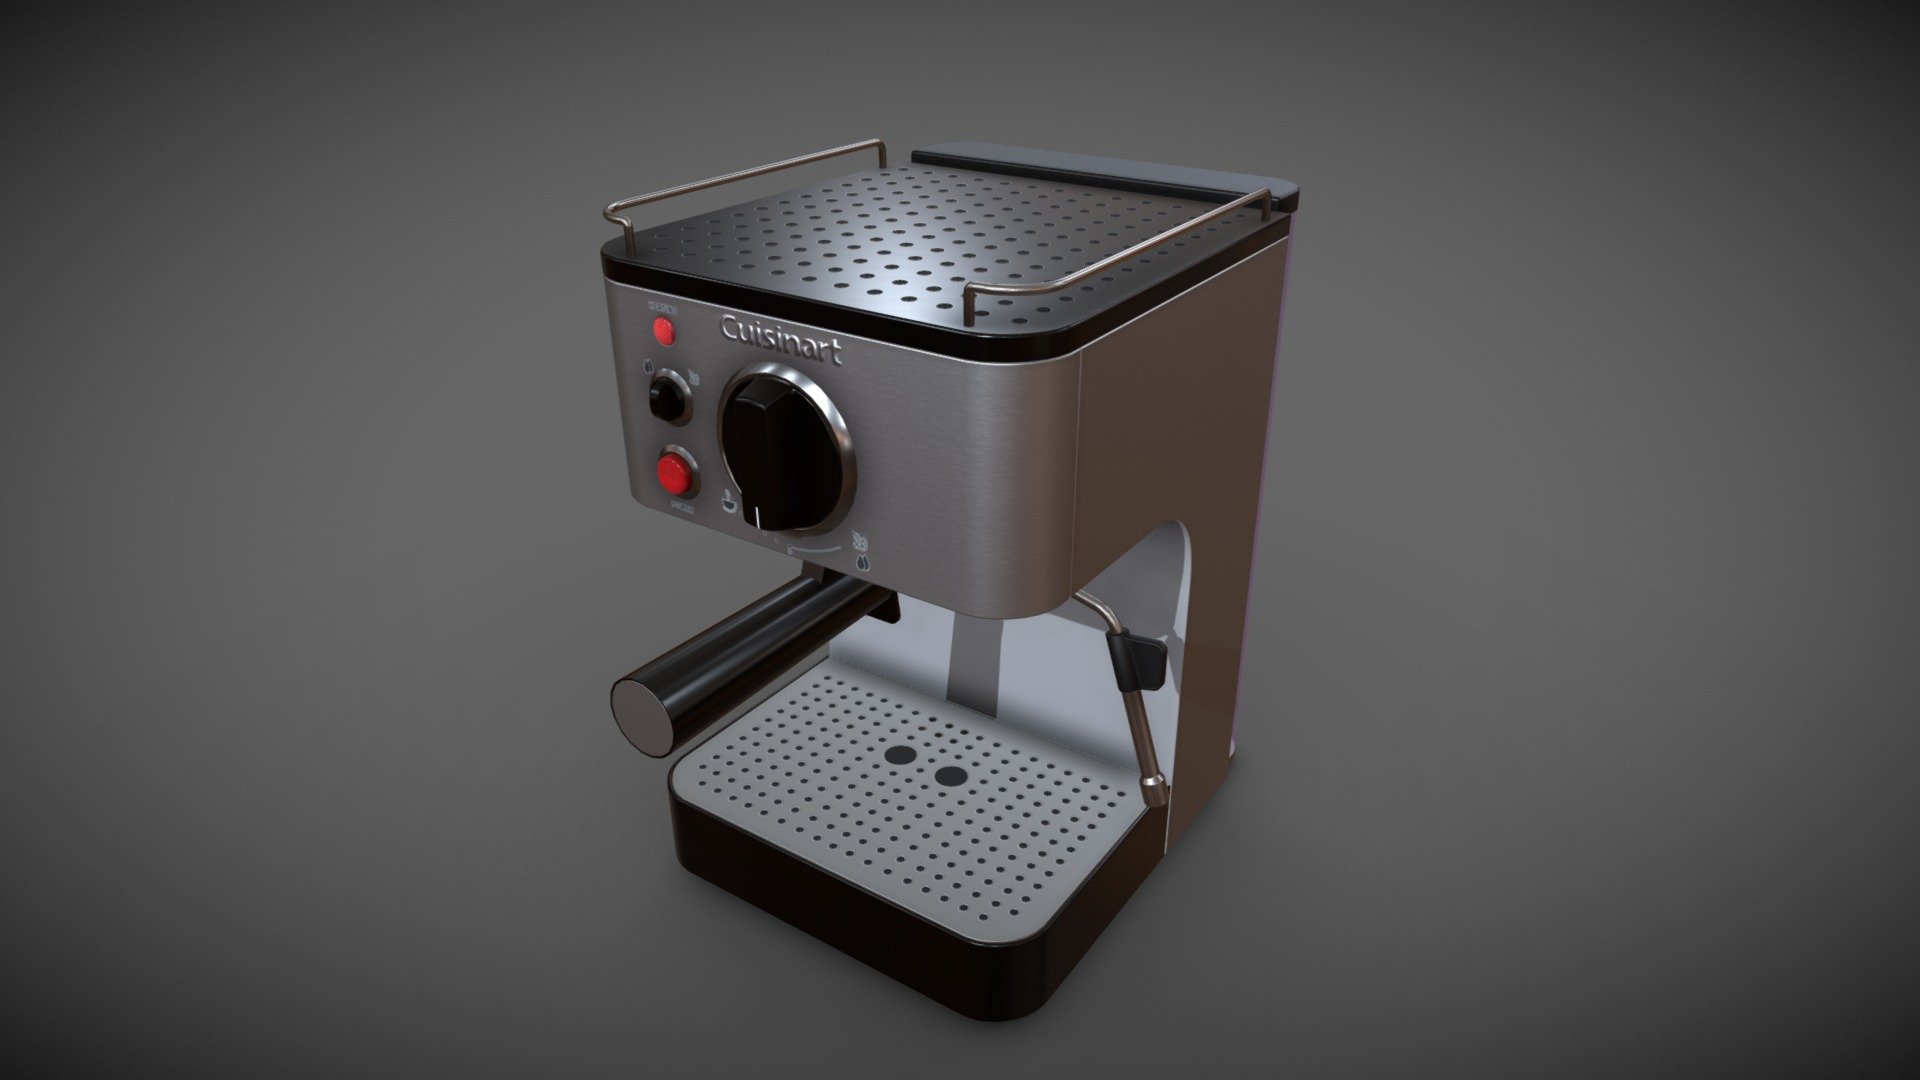 Espresso Maker Cuisinart EM-100 



File formats: 3ds Max 2012,  FBX



This model contains PNG textures(4096x4096):

-Base Color

-Metallness

-Roughness



-Diffuse

-Glossiness

-Specular

 

-Normal

-Ambient Occlusion - Espresso Maker Cuisinart EM-100 - Buy Royalty Free 3D model by fade_to_black 3d model